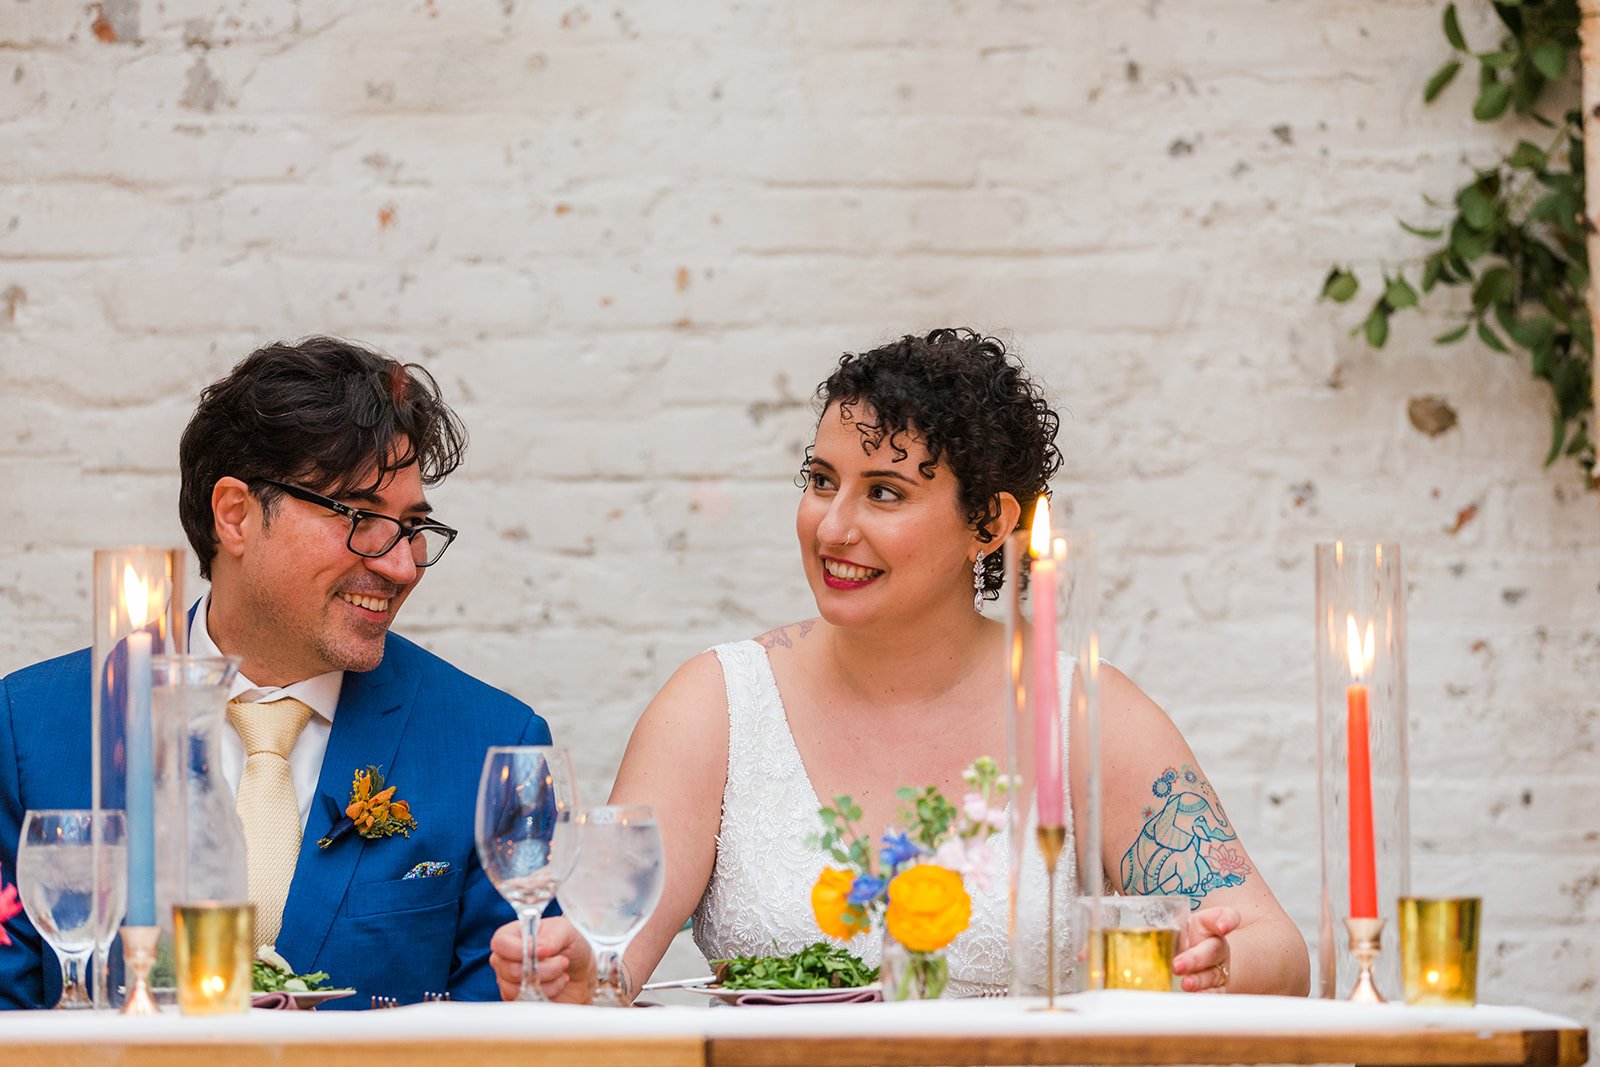  Documentary candid photo of bride and groom reacting to a toast during the reception at nontraditional Jewish and Venezuelan wedding at The Joinery Chicago an Industrial loft wedding venue In Logan Square.  